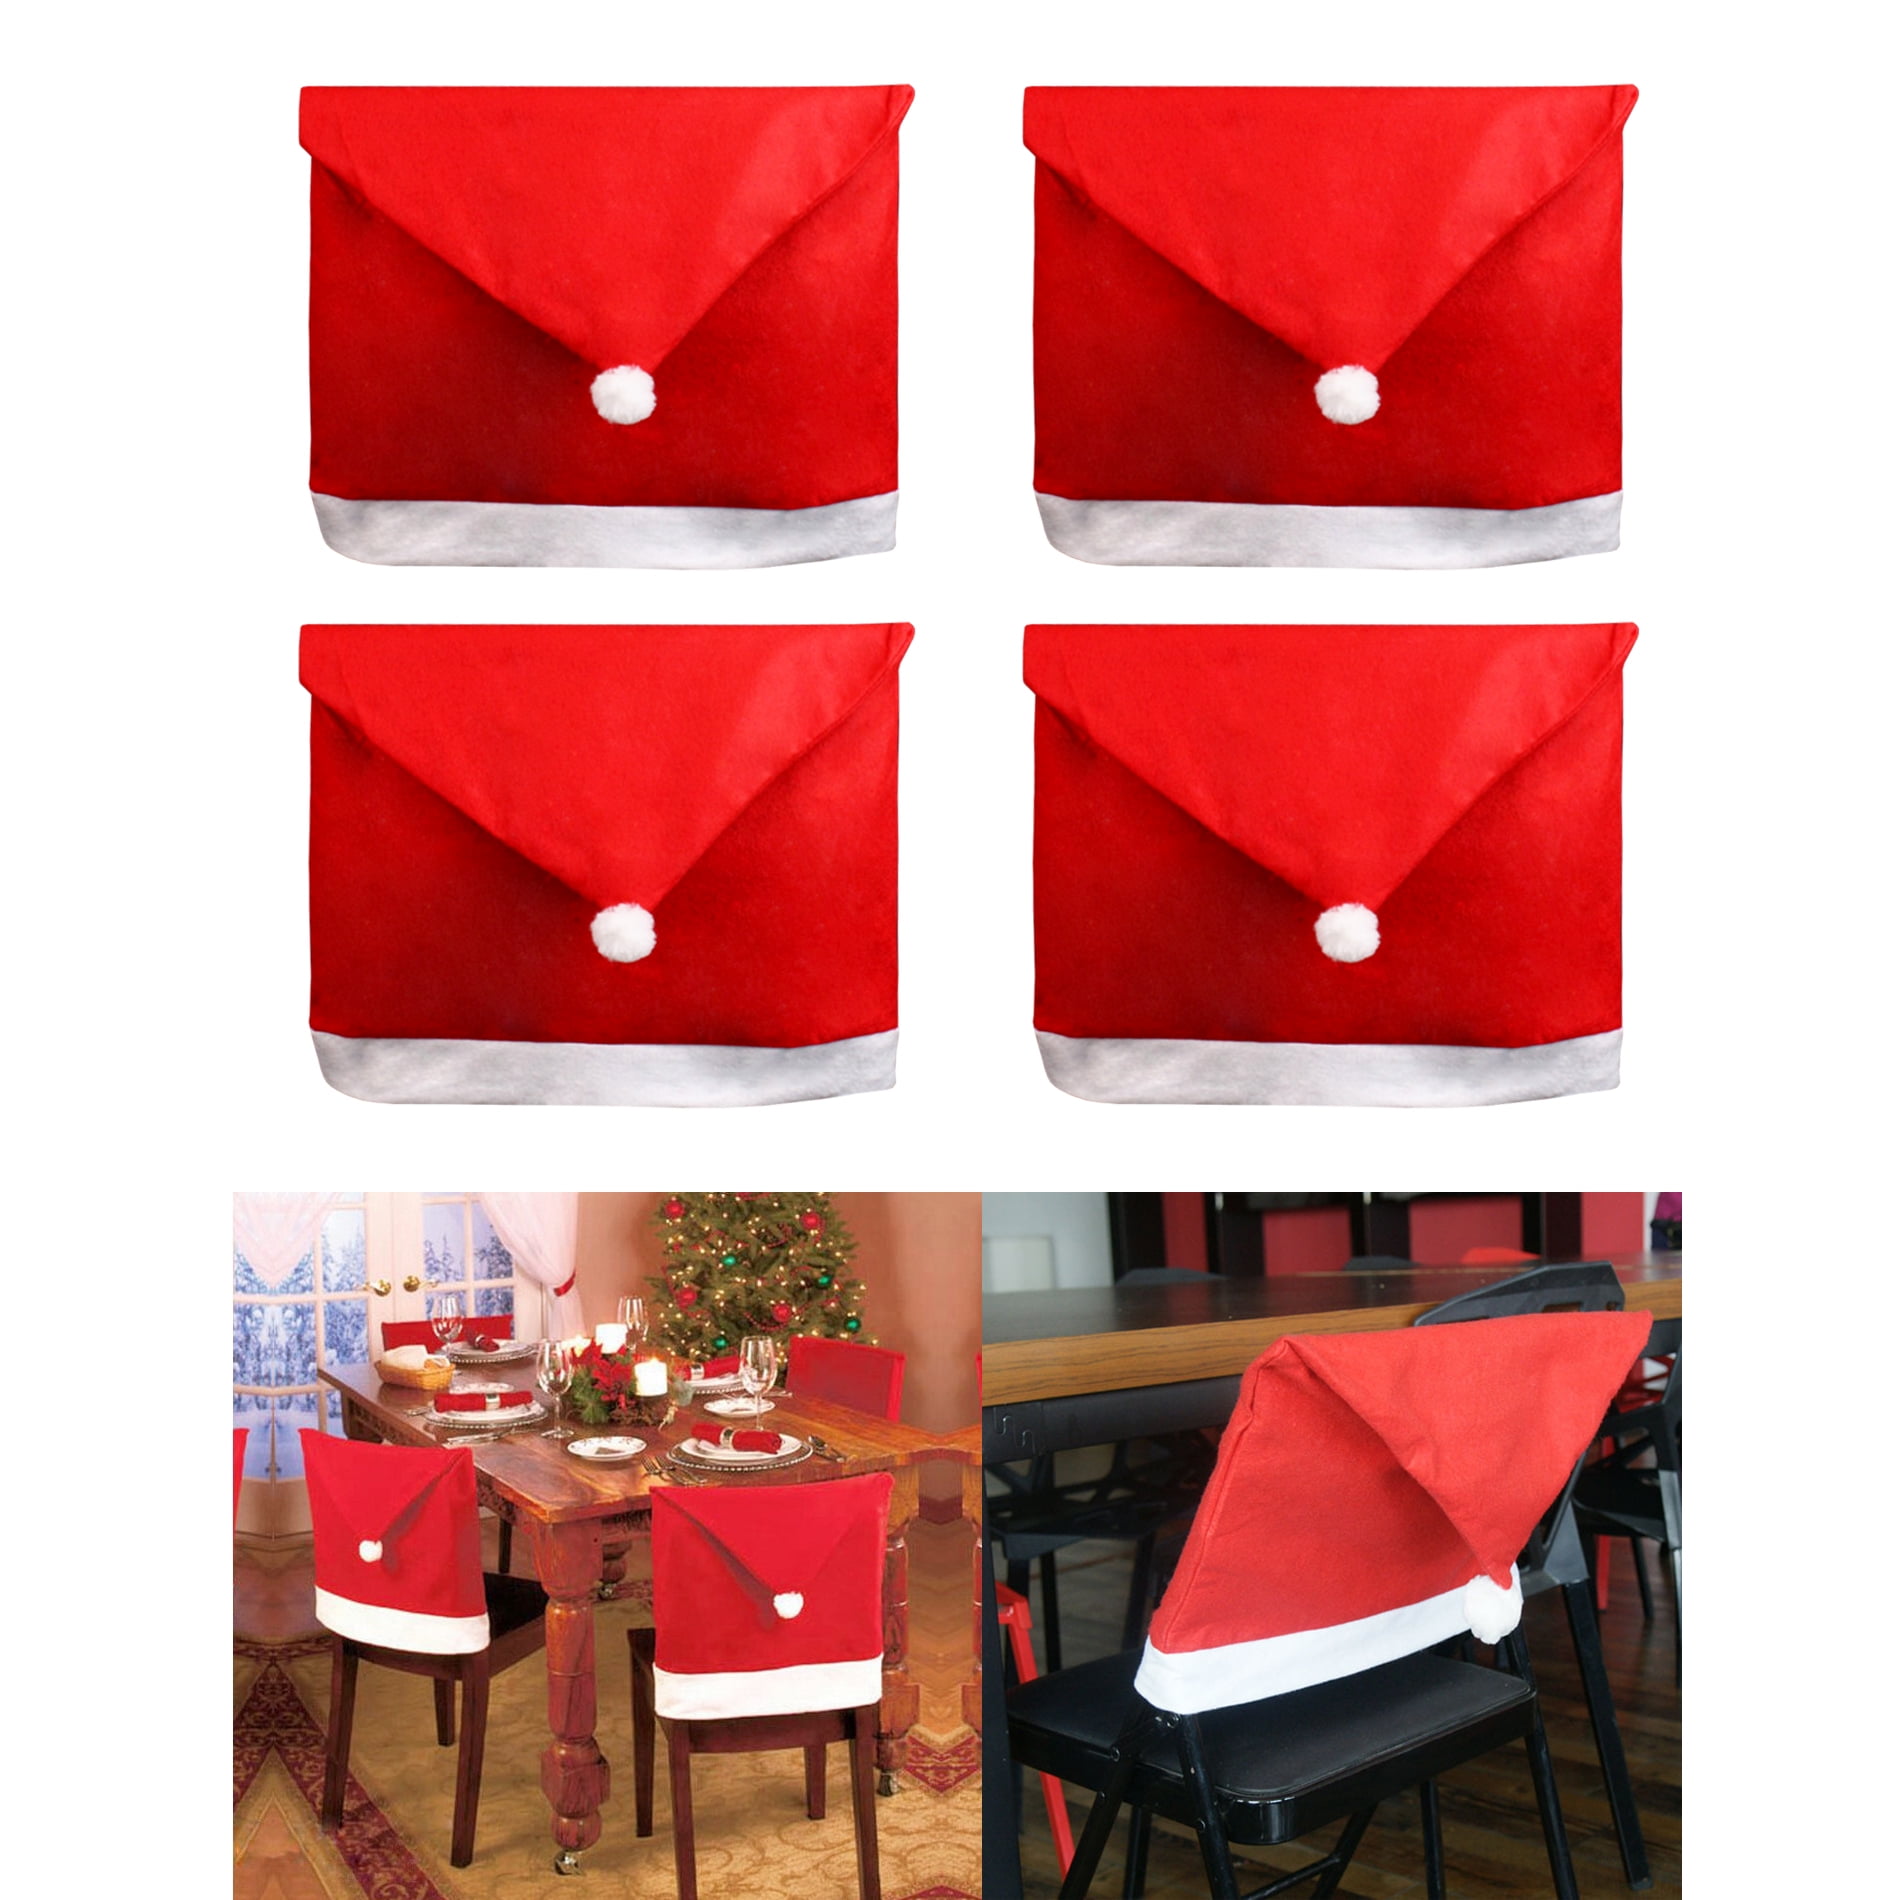 A Christmas Chair Back Cover,Santa Clause Hat,Red Hat Chair Back Cover,Christmas Dining Chair Slipcovers,Xmas Chair Protector For Dining Room Holiday Decorations Banquet Festival Decor N 1 